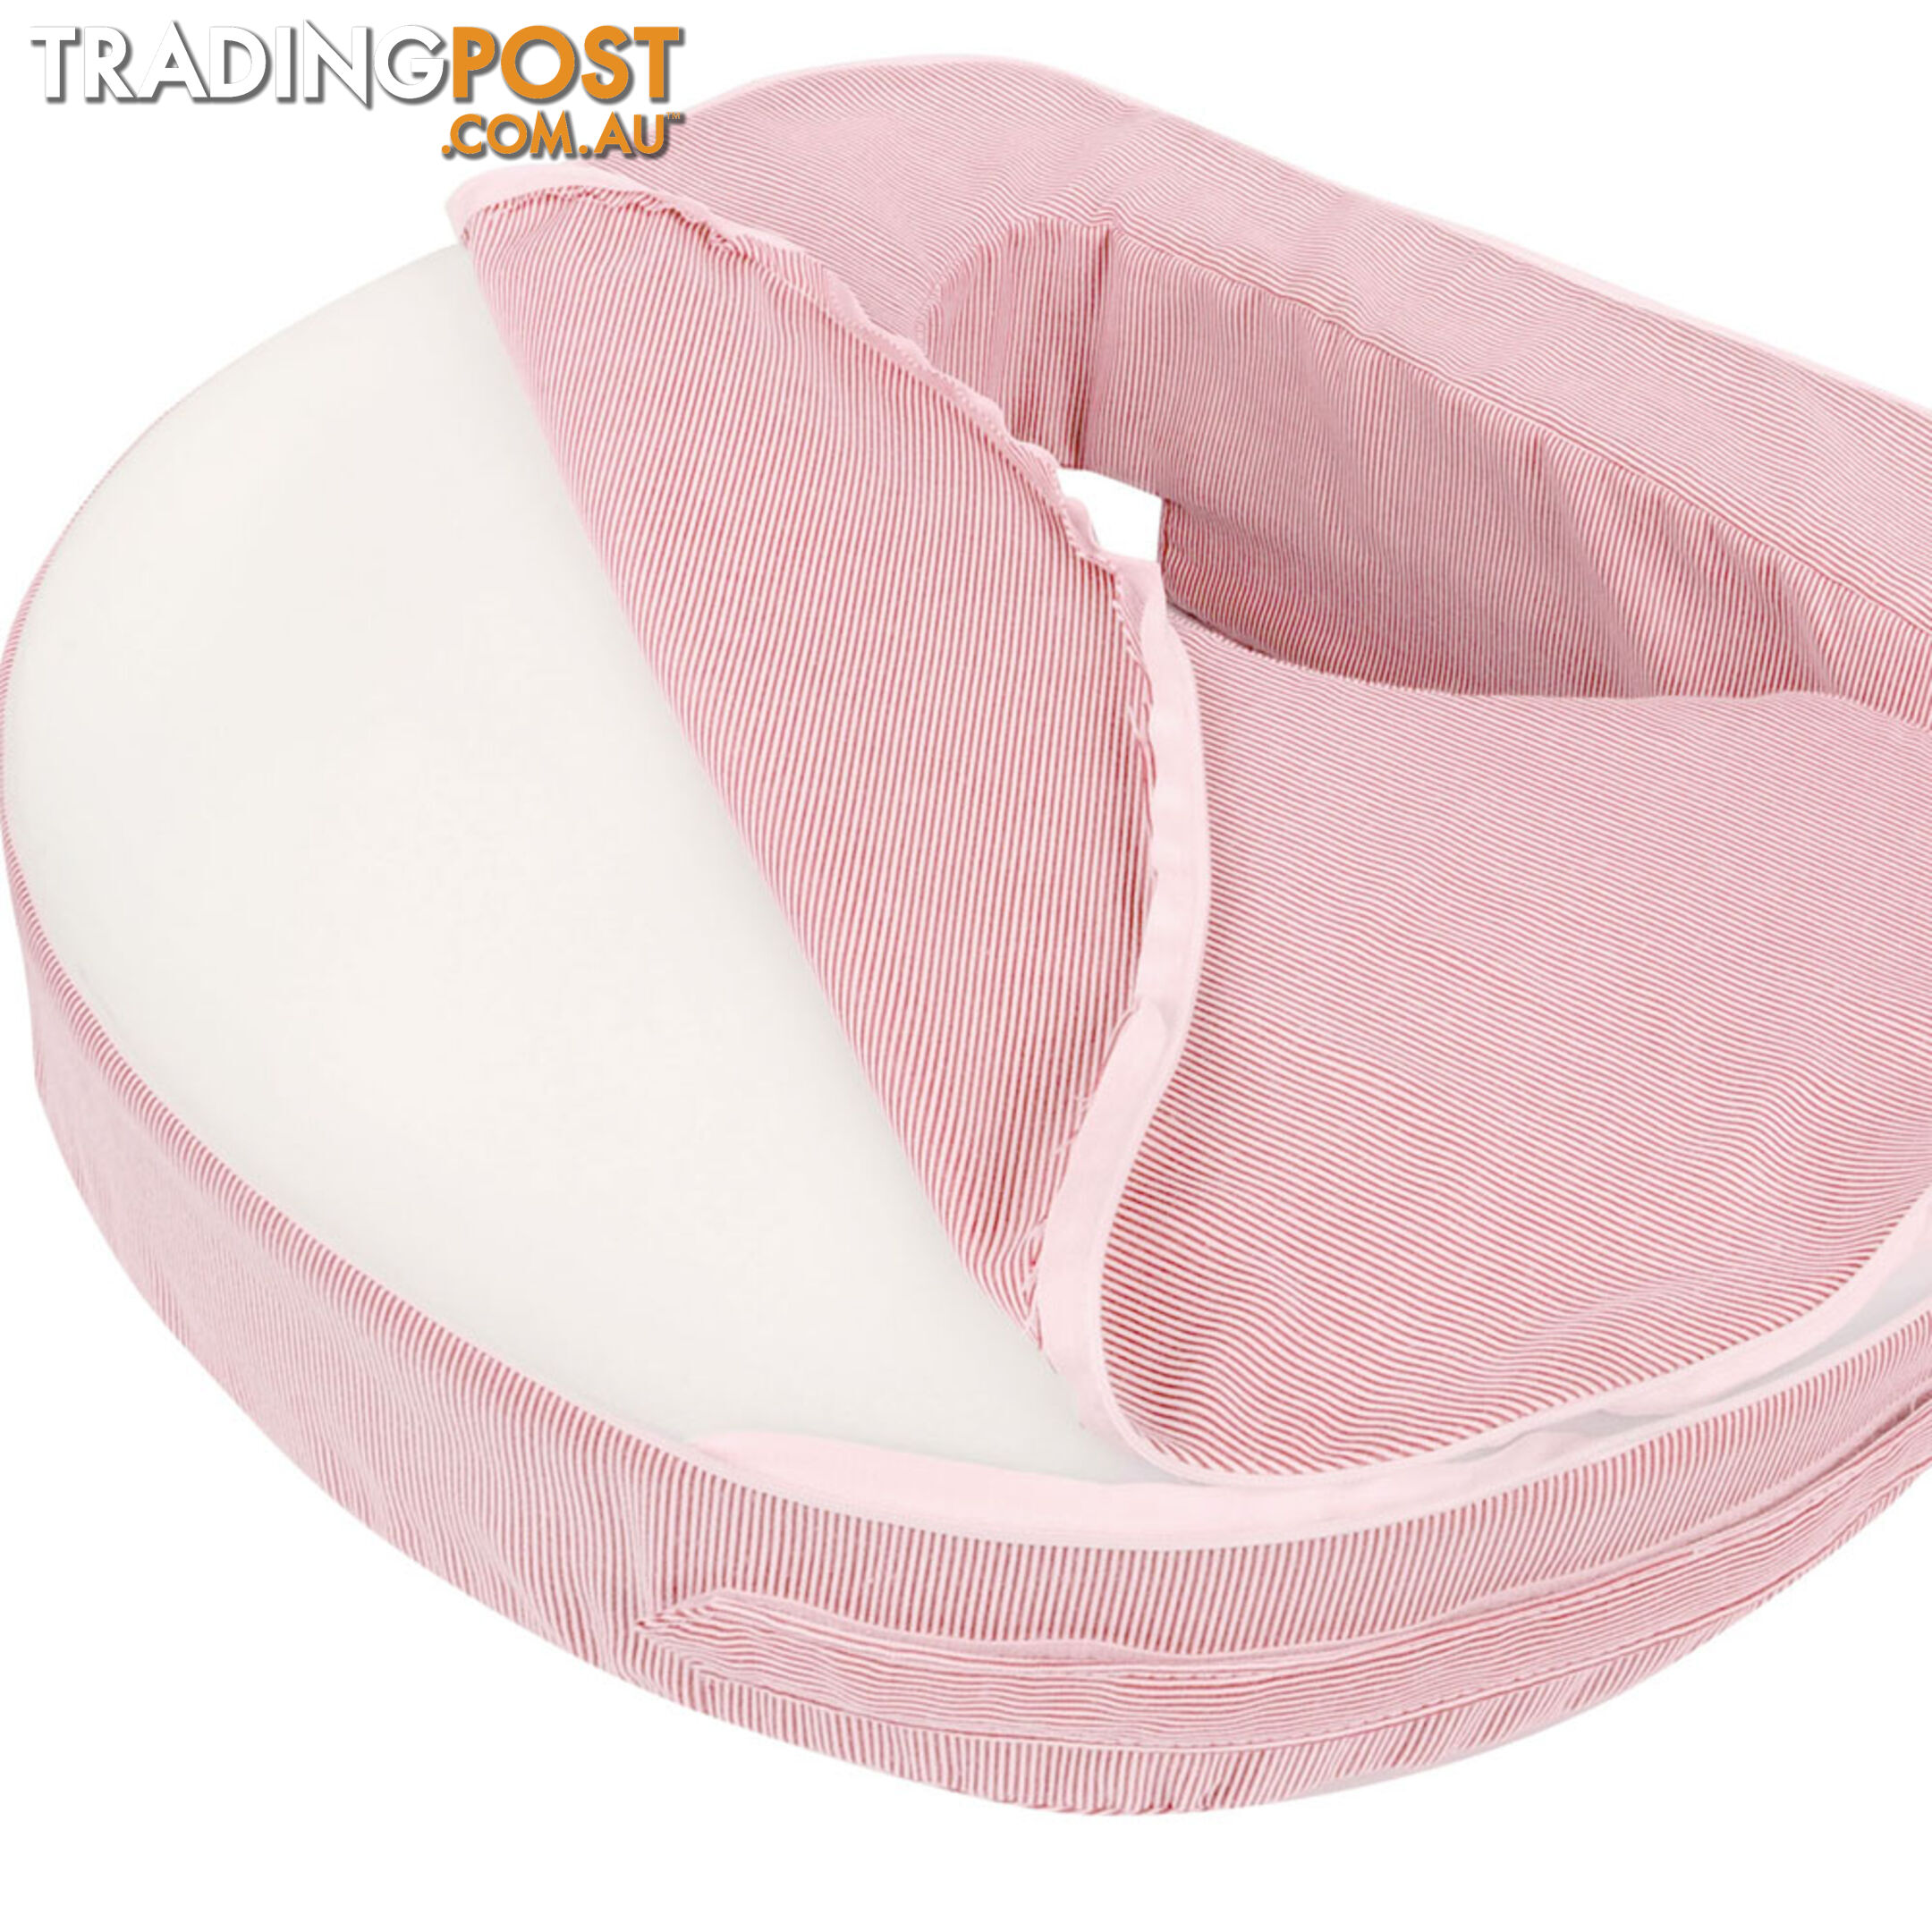 Baby Breast Feeding Support Memory Foam Pillow w/ Zip Cover Pink